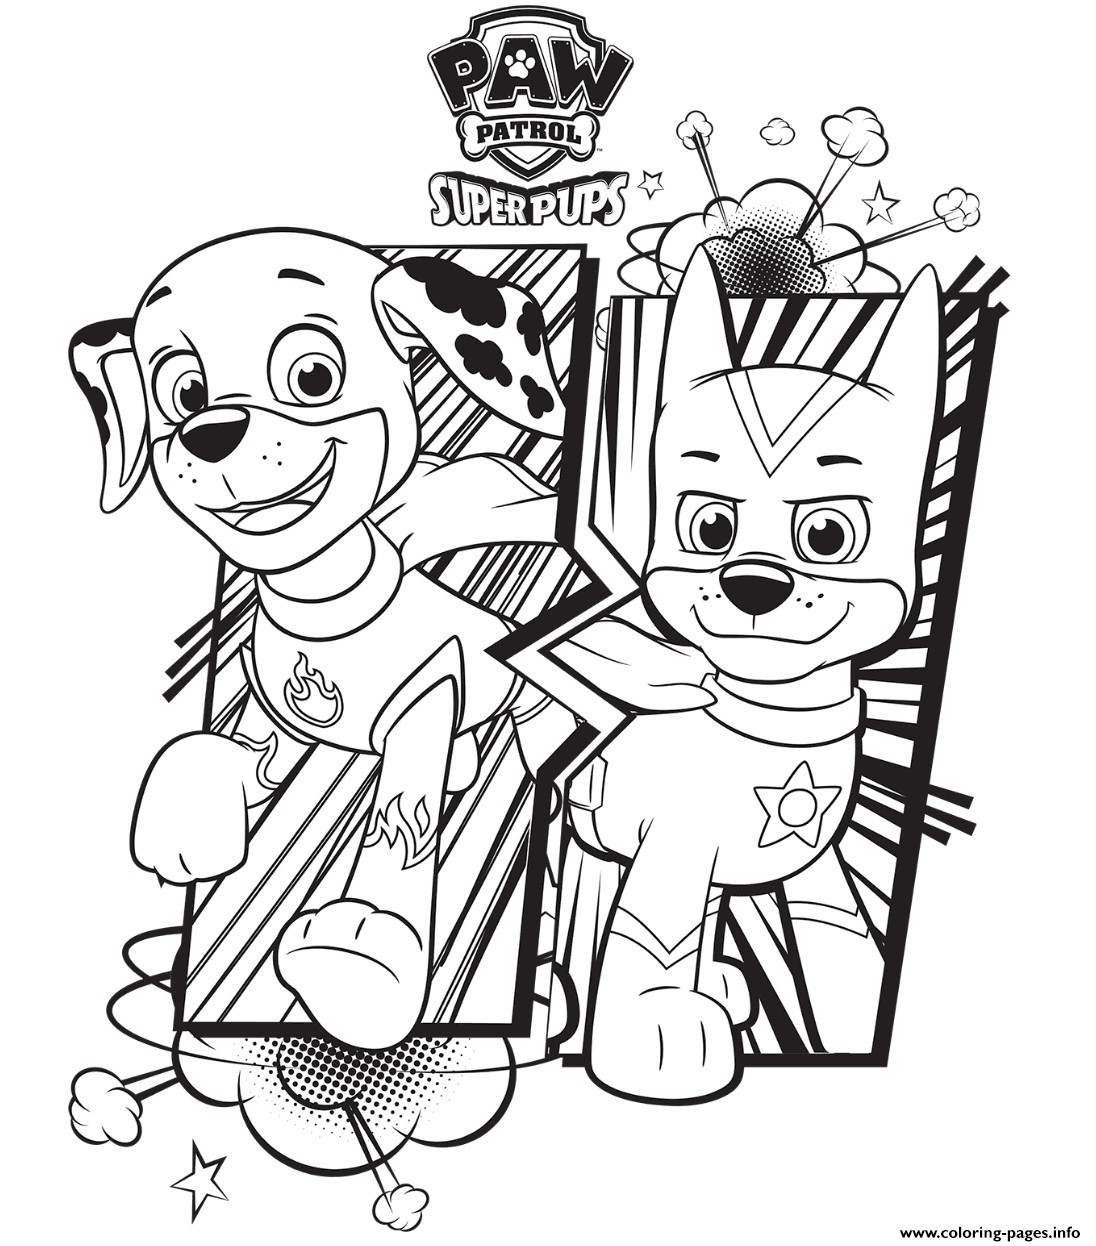 paw patrol vehicles coloring pages at getcolorings